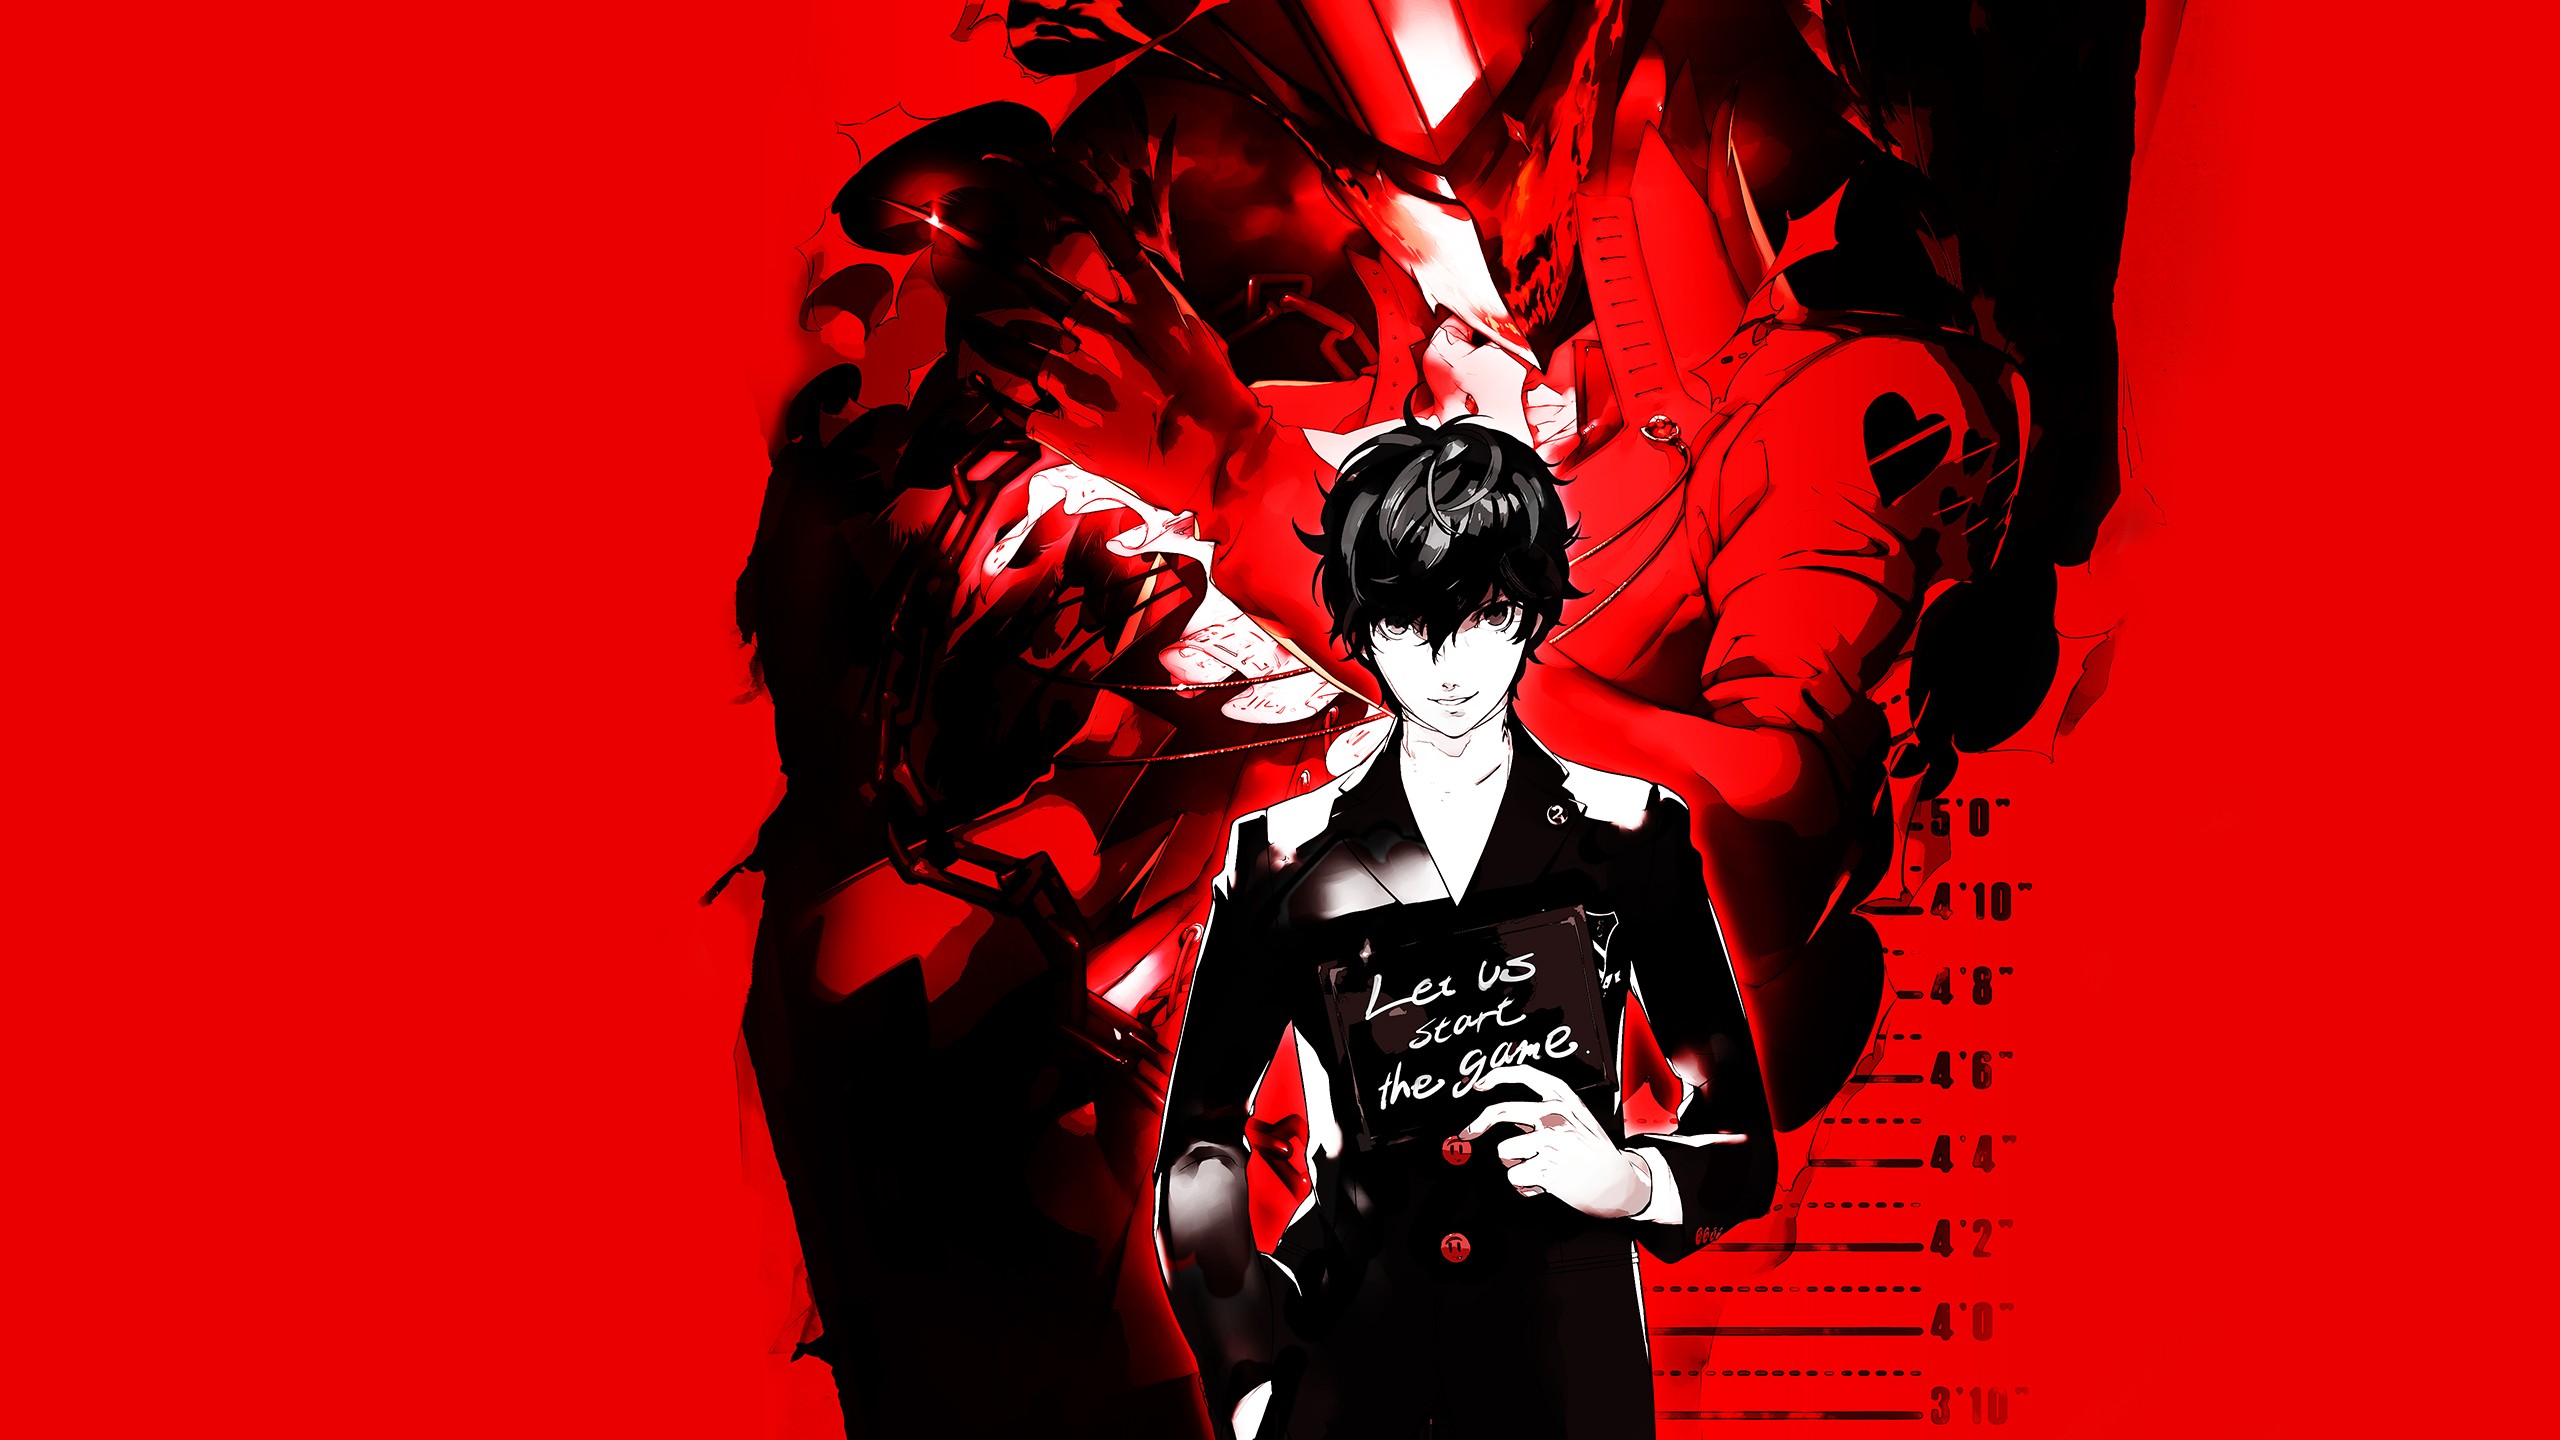 Anime 2560x1440 Persona 5 Persona series Akira Kurusu anime games anime red background simple background red video games